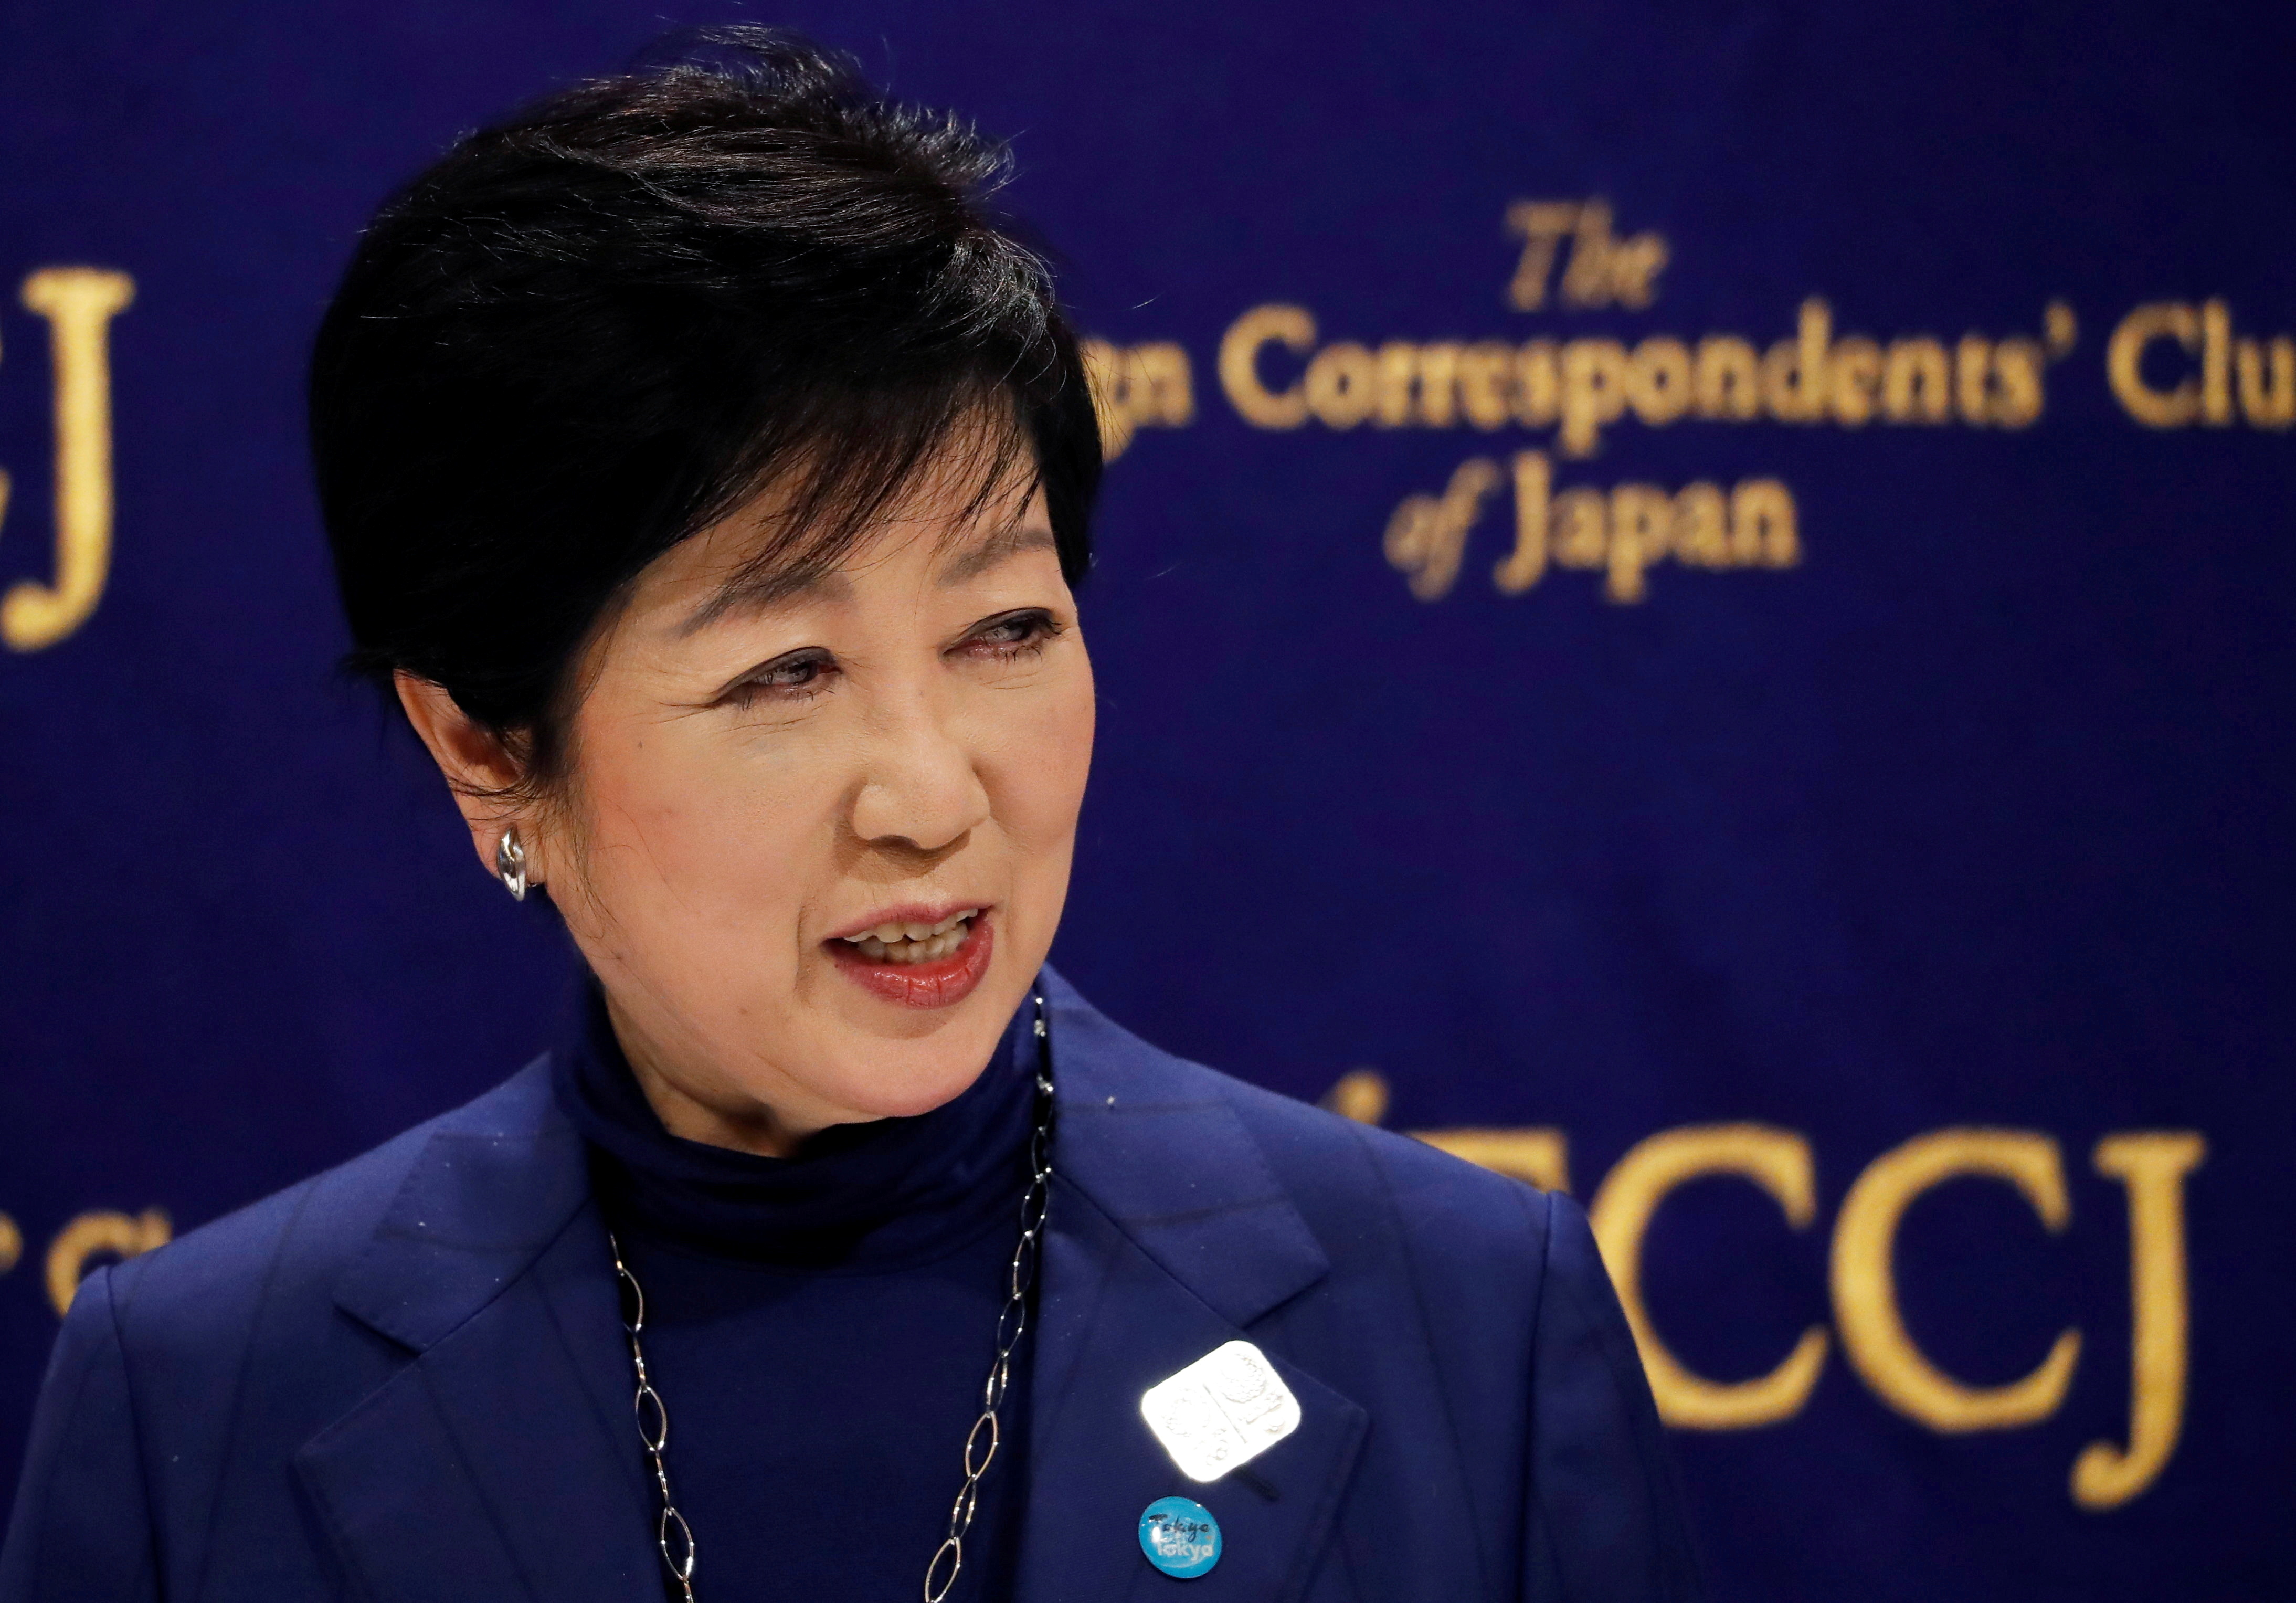 Tokyo Governor Yuriko Koike attends a news conference, amid the coronavirus disease (COVID-19) outbreak, at the Foreign Correspondents' Club of Japan, in Tokyo, Japan, November 24, 2020. REUTERS/Issei Kato/File Photo